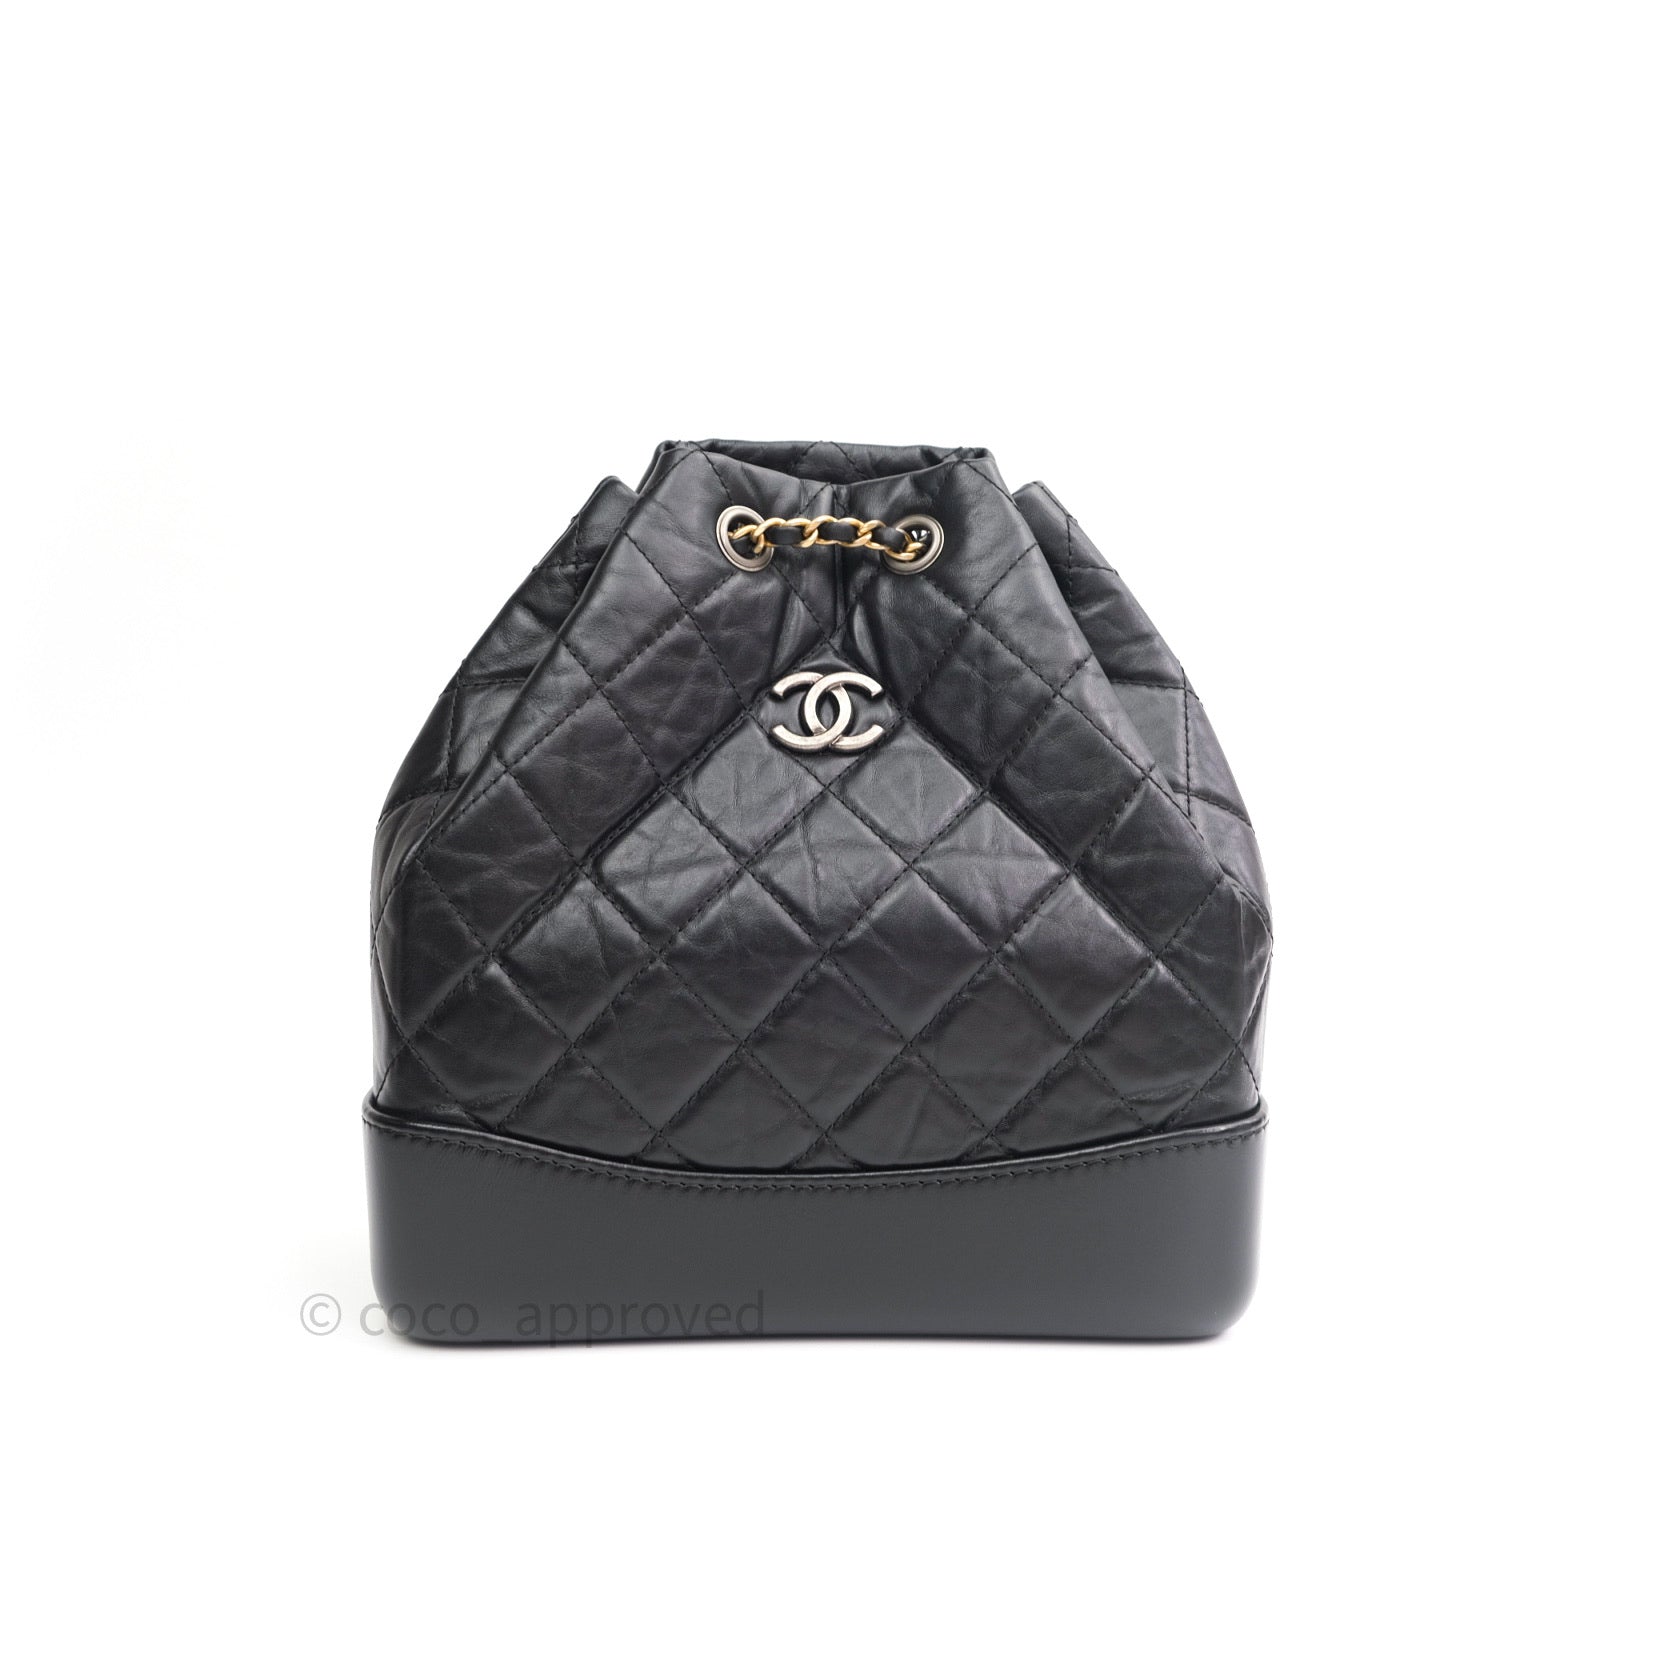 Chanel Medium Gabrielle Backpack Black Aged Calfskin – Coco Approved Studio